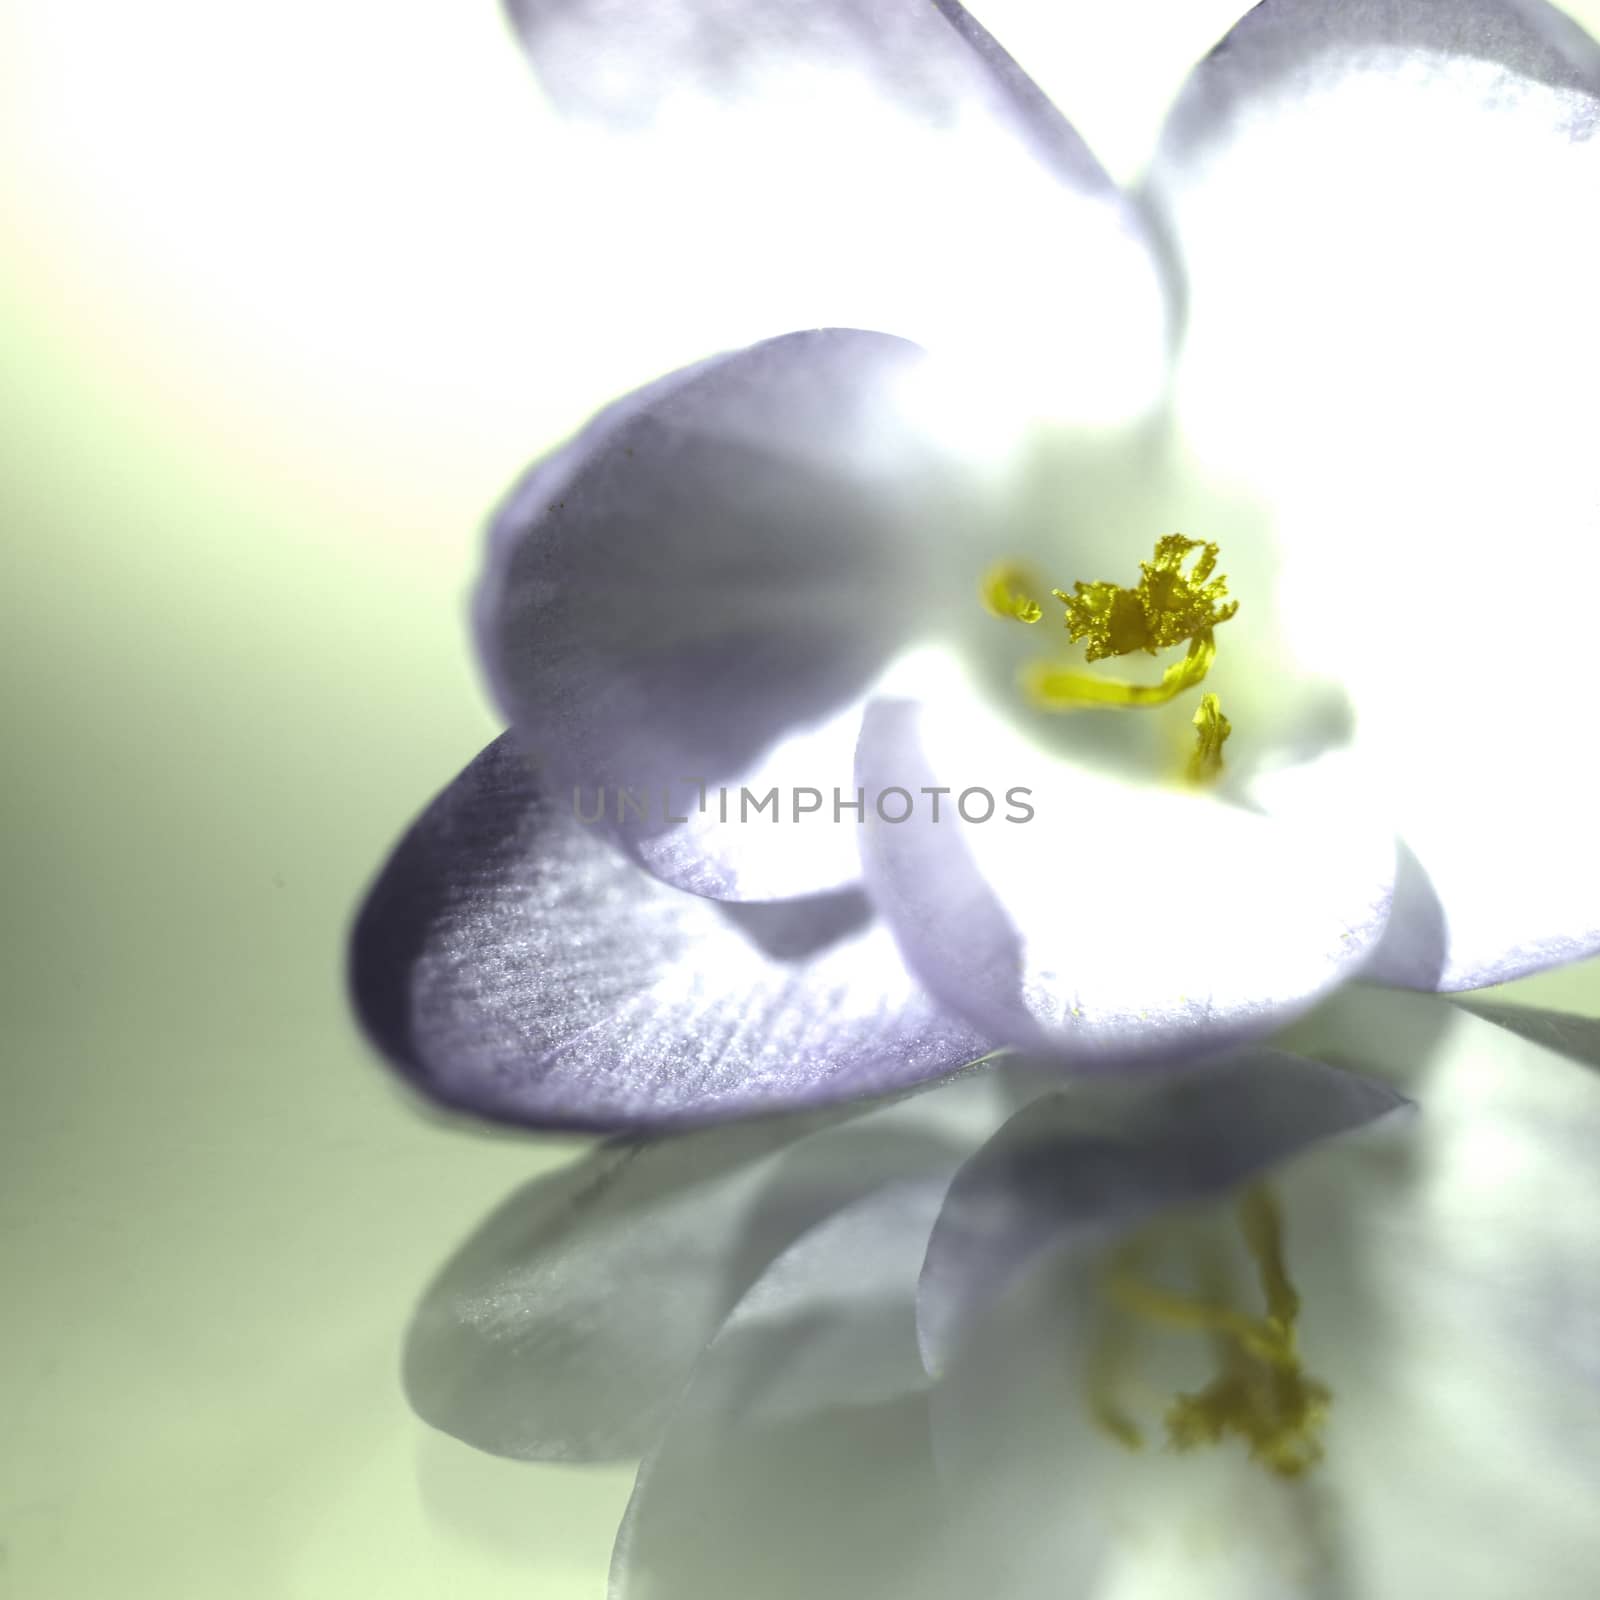 Abstract violet crocus flower on reflective surface 